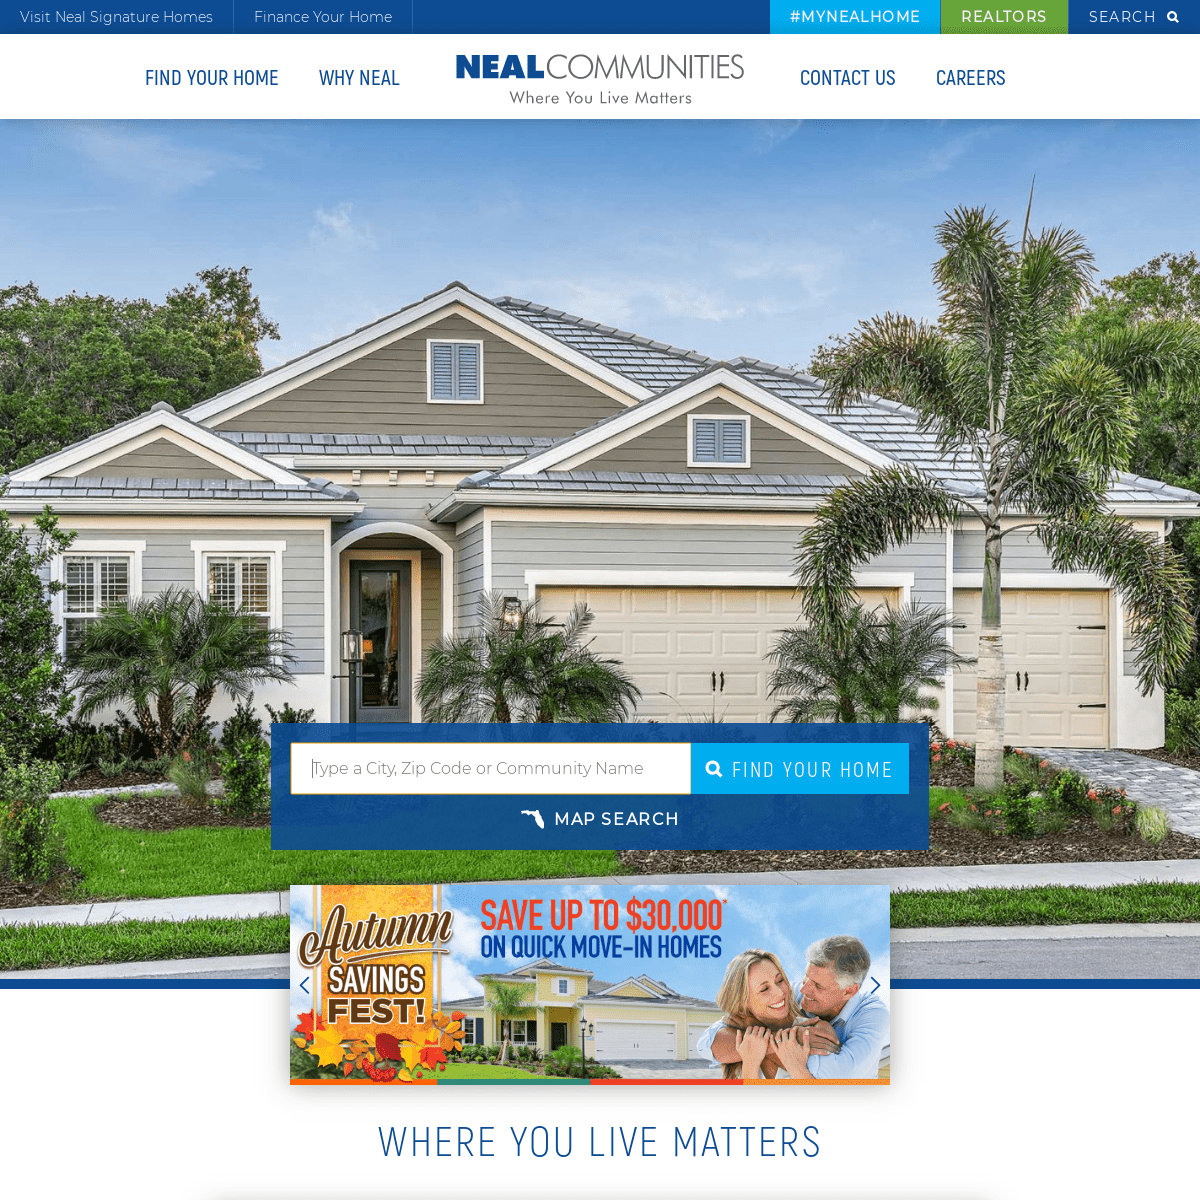 Trusted New Home Builder in Florida for 40+ Years - Neal Communities